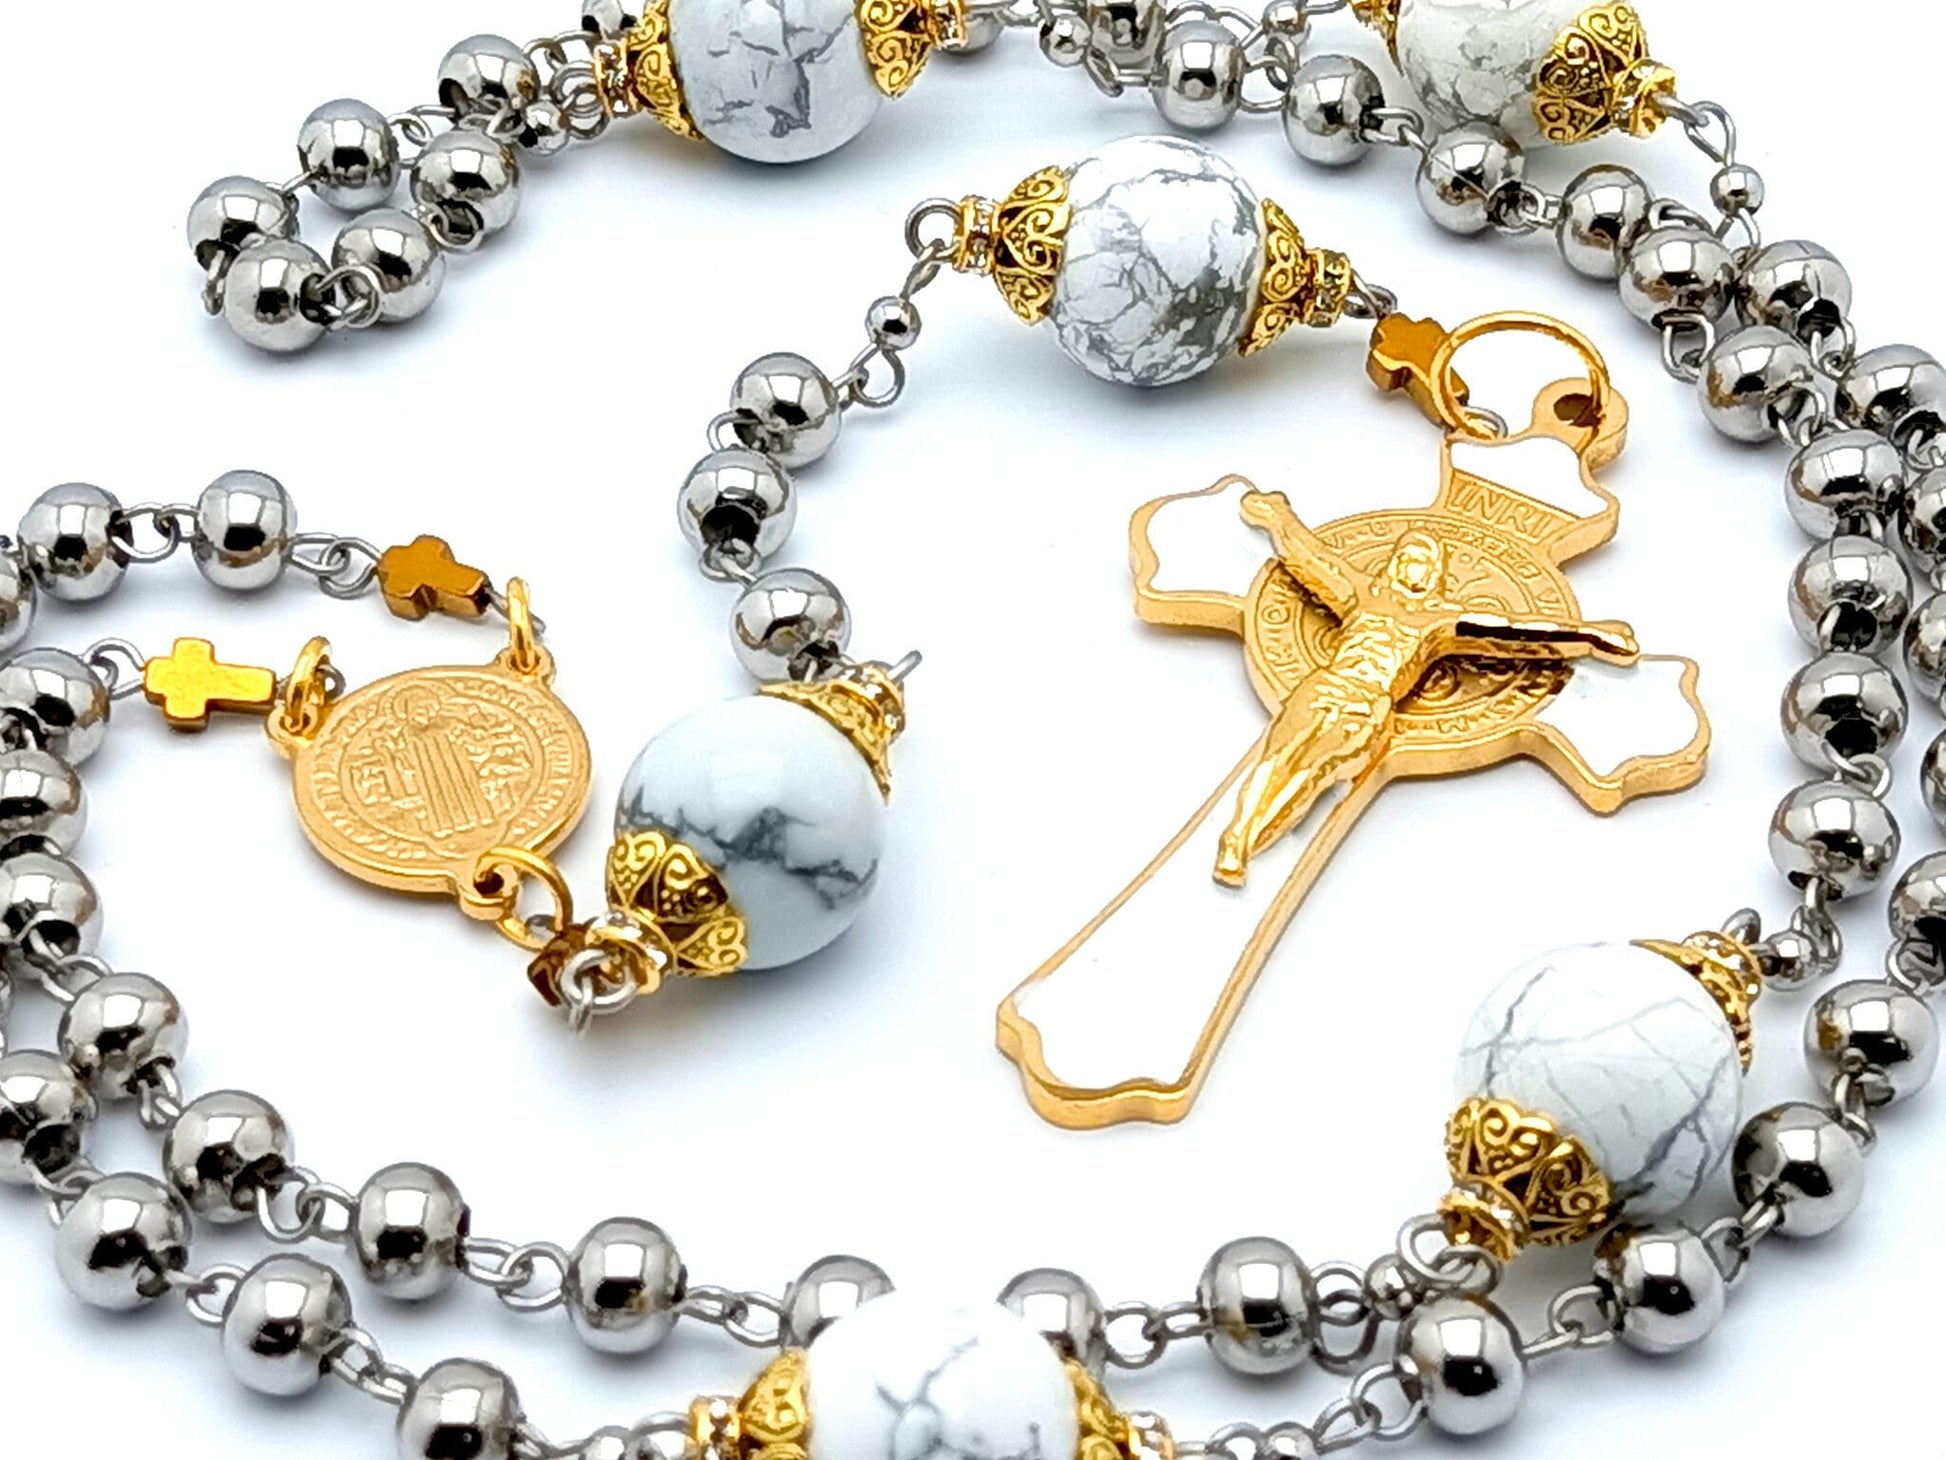 Saint Benedict unique rosary beads with stainless steel and white beads, stainless steel gold plated and white enamel crucifix and gold plated stainless steel centre medal.